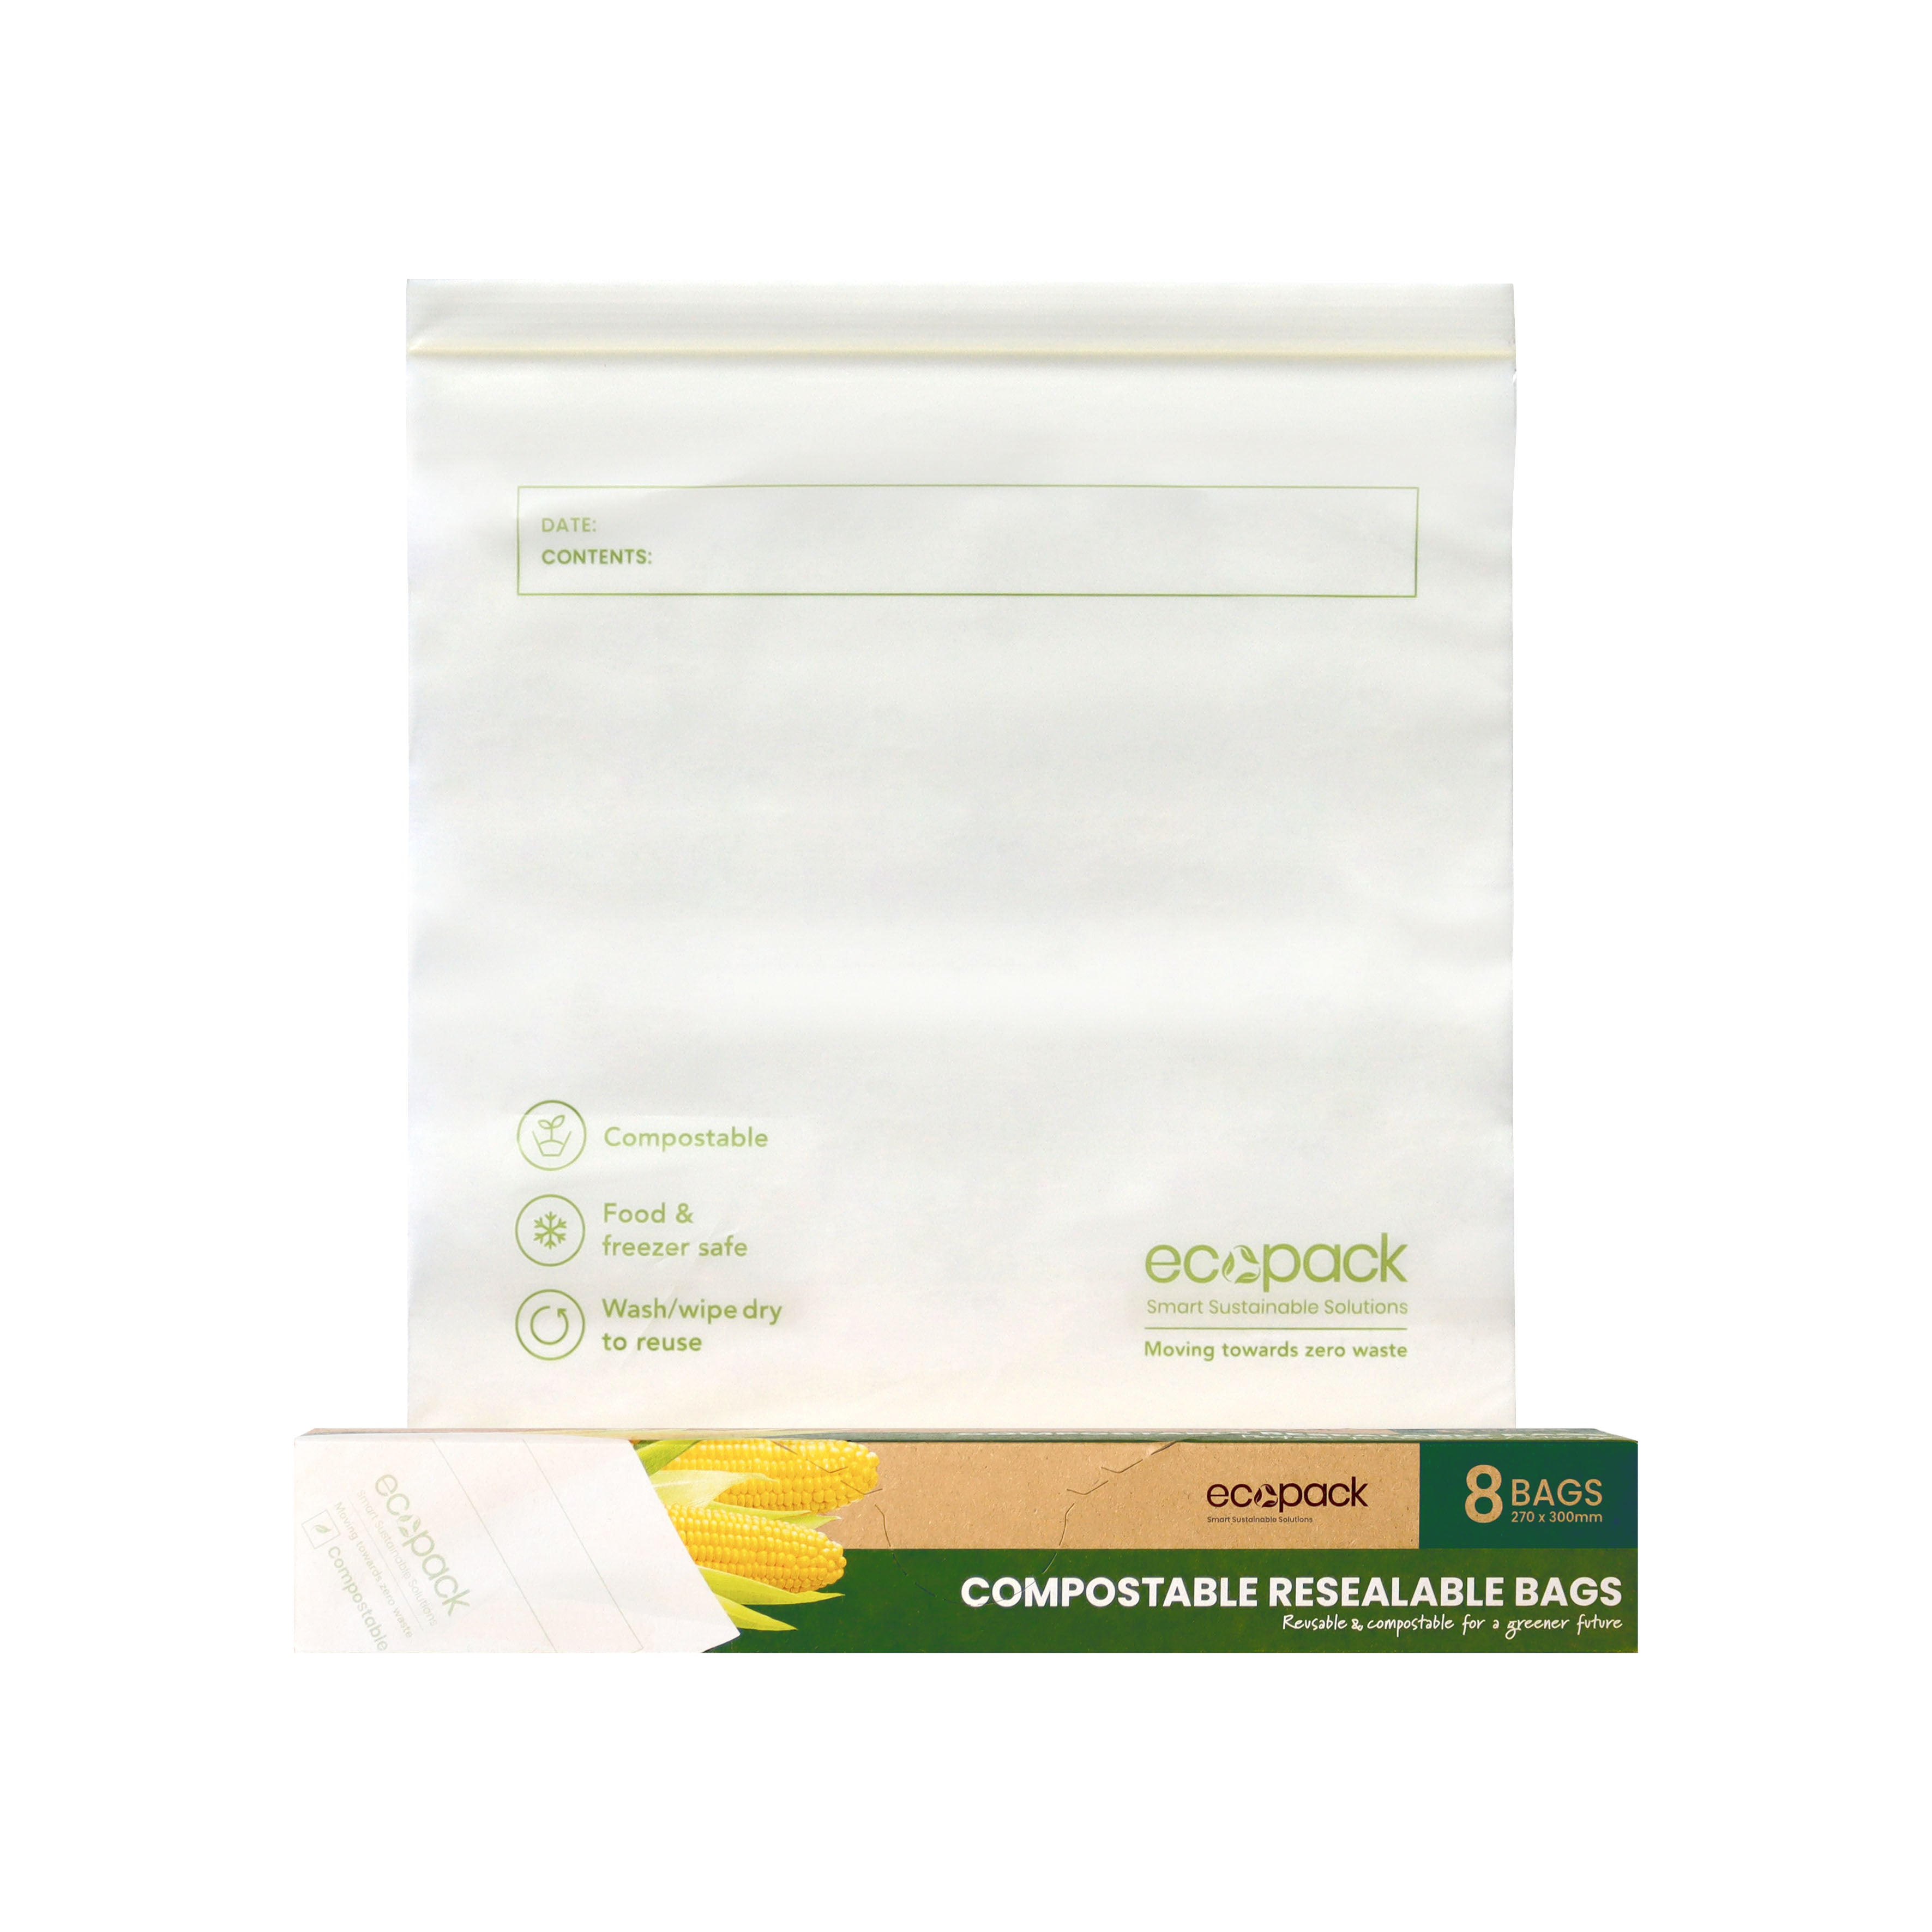 Ecopack Compostable Resealable Storage Bags set ( 3 x 8 ) -24 Bags